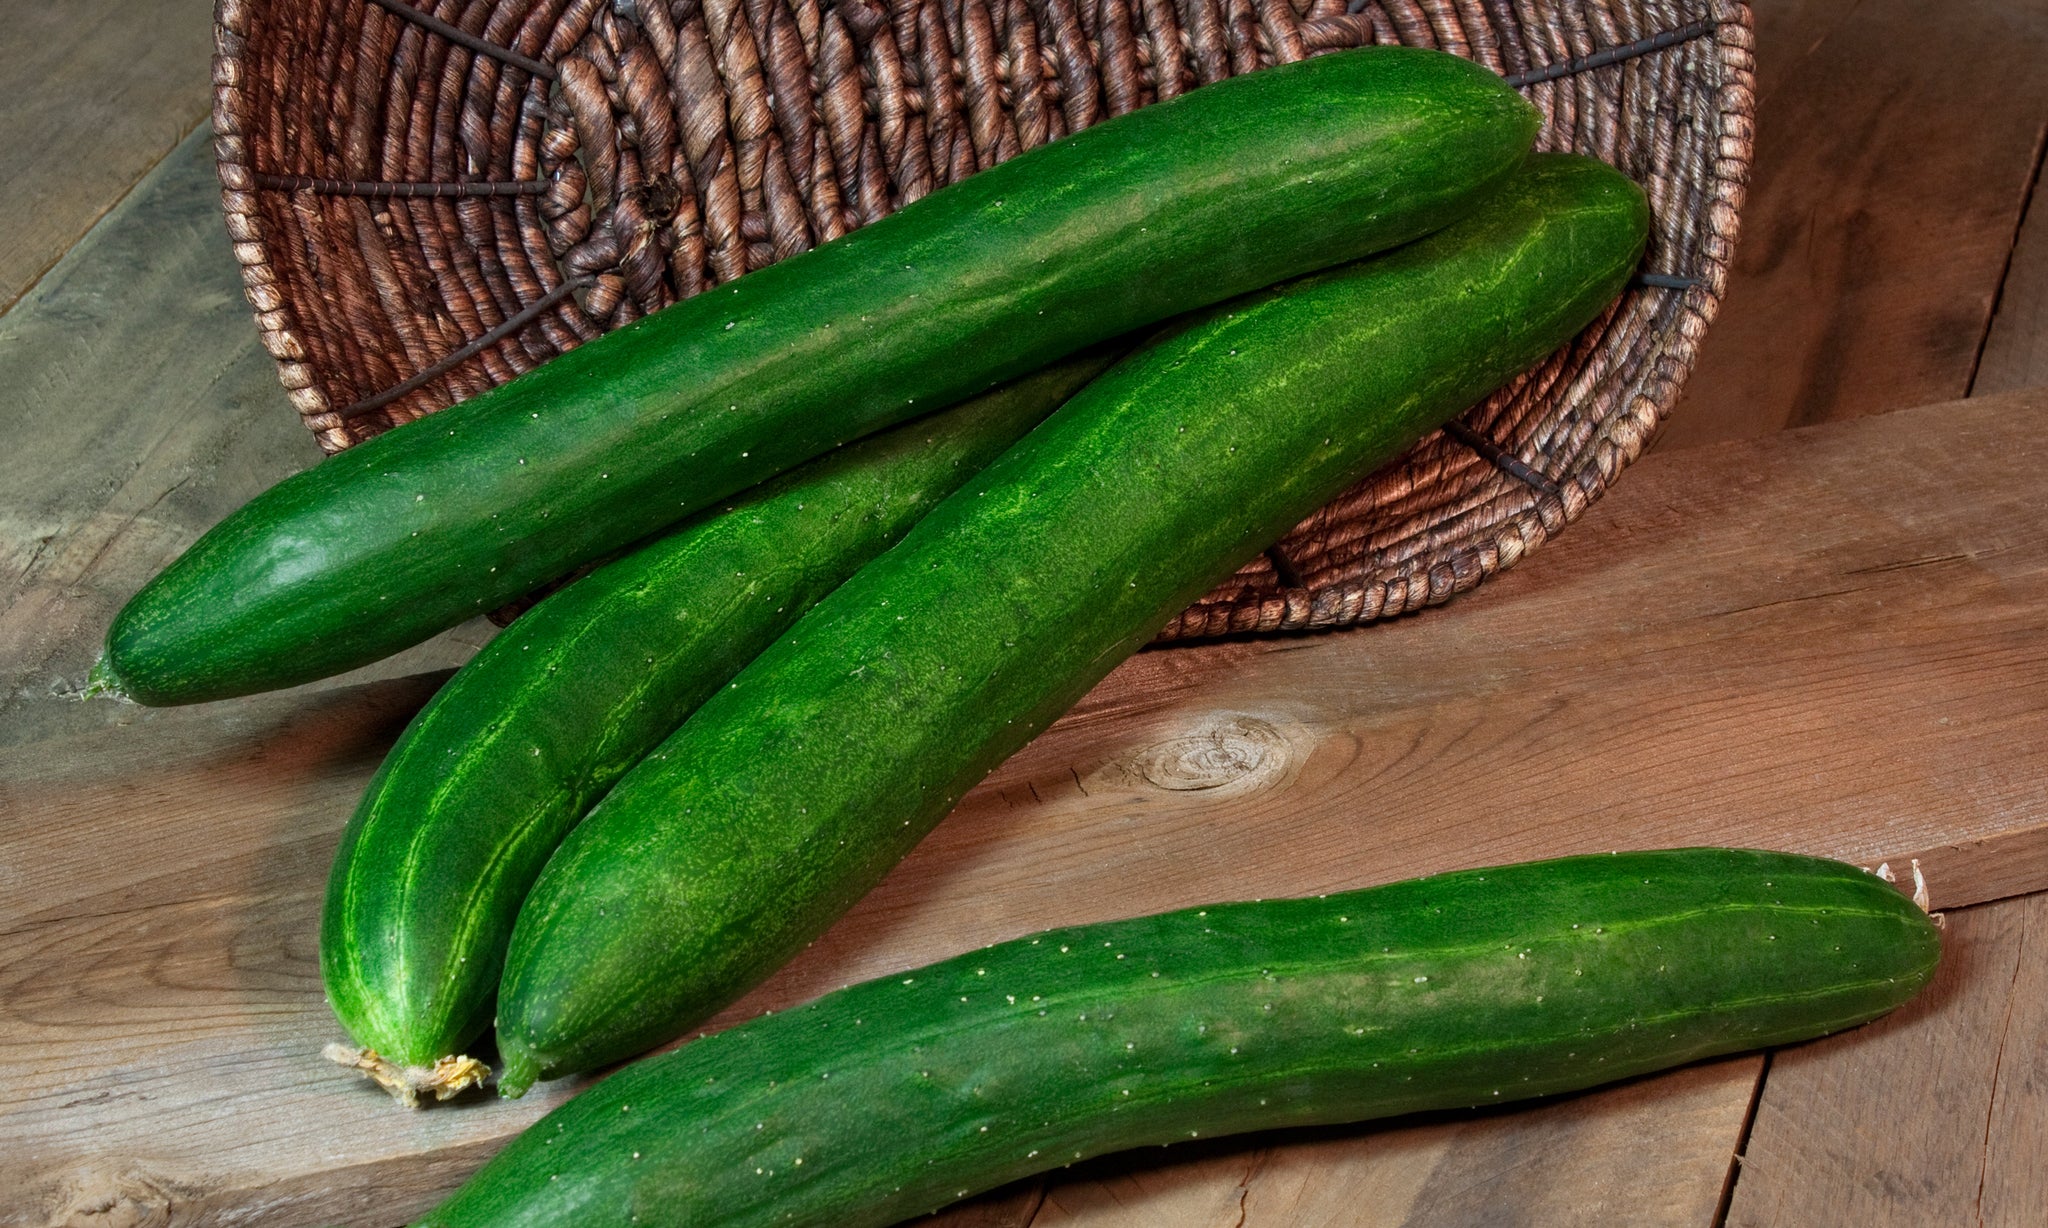 Slicer Cucumbers - Delight Quality Produce